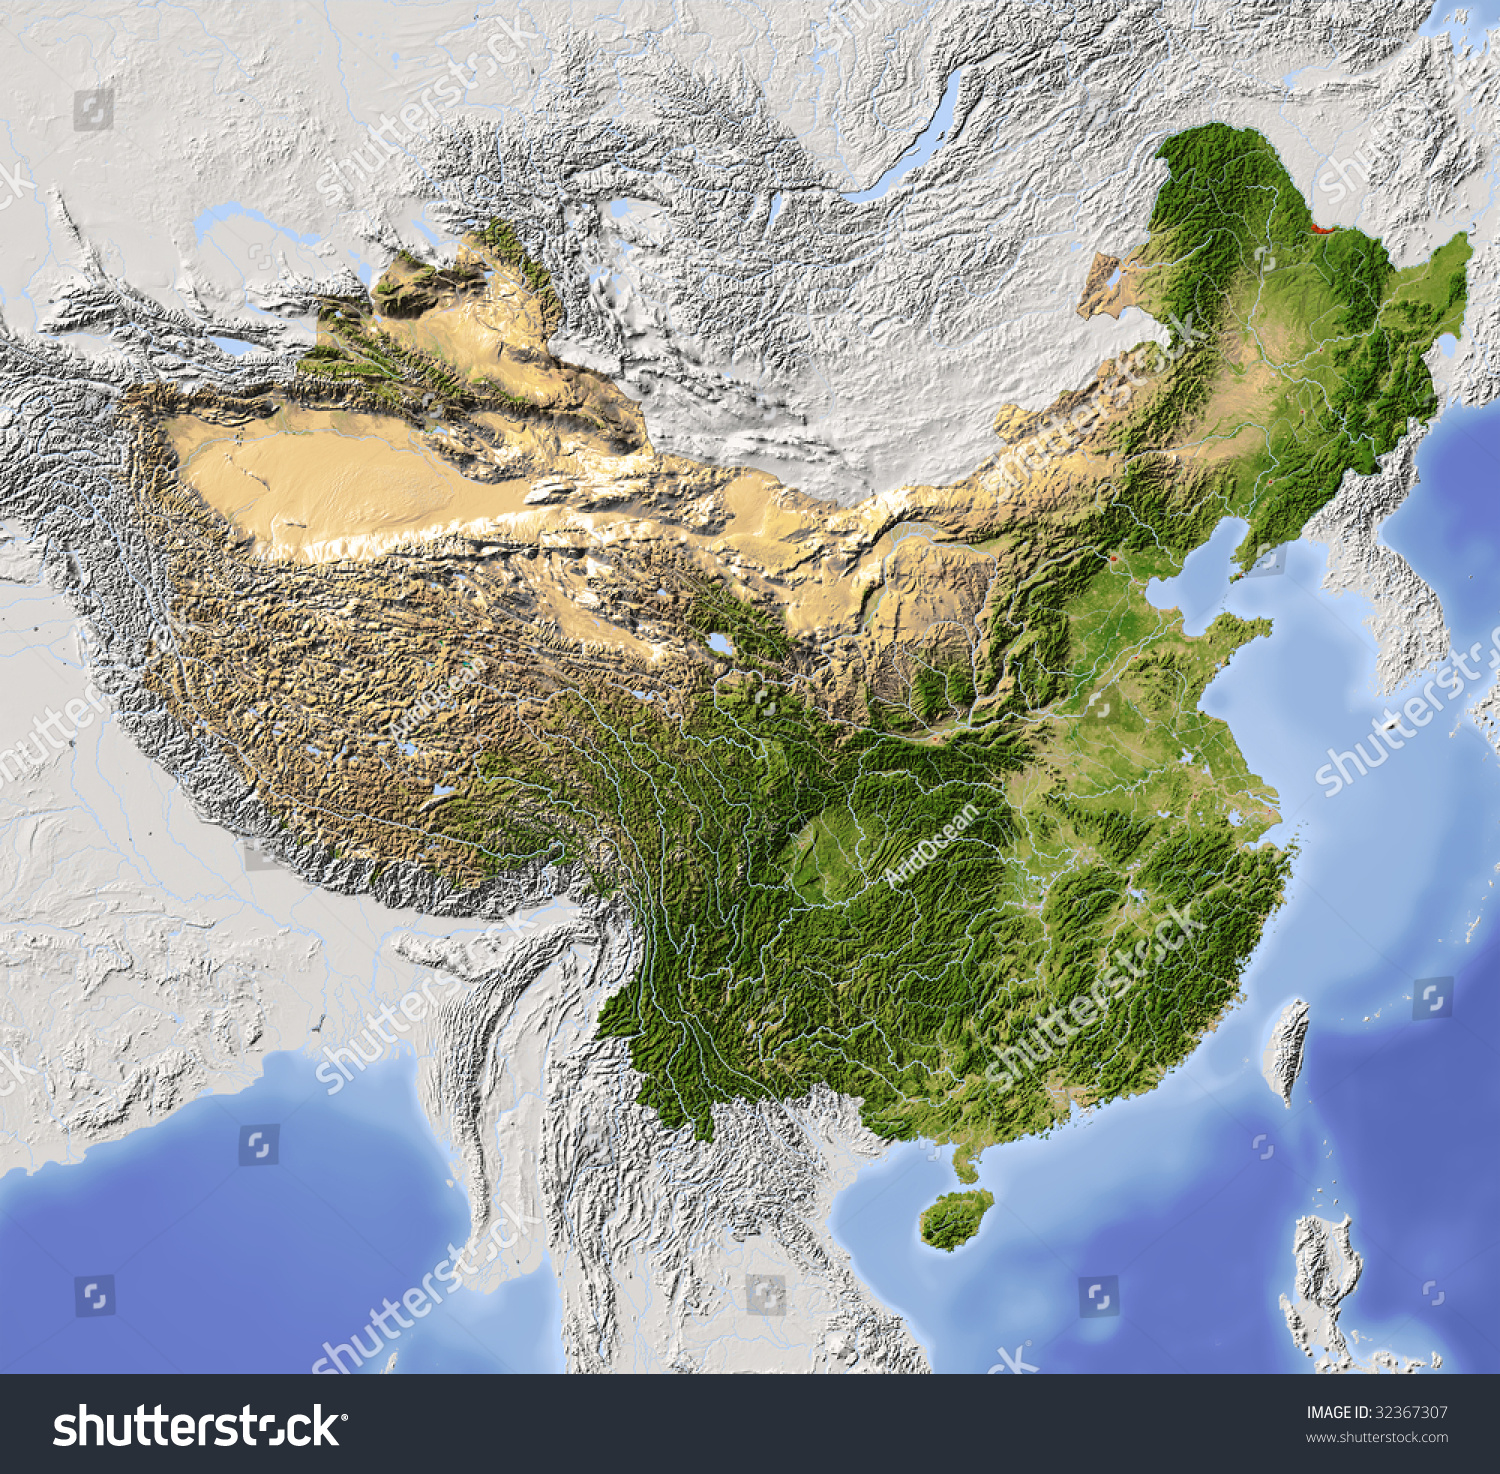 Stock Photo China Shaded Relief Map Colored According To Vegetation With Major Urban Areas Includes Clip 32367307 